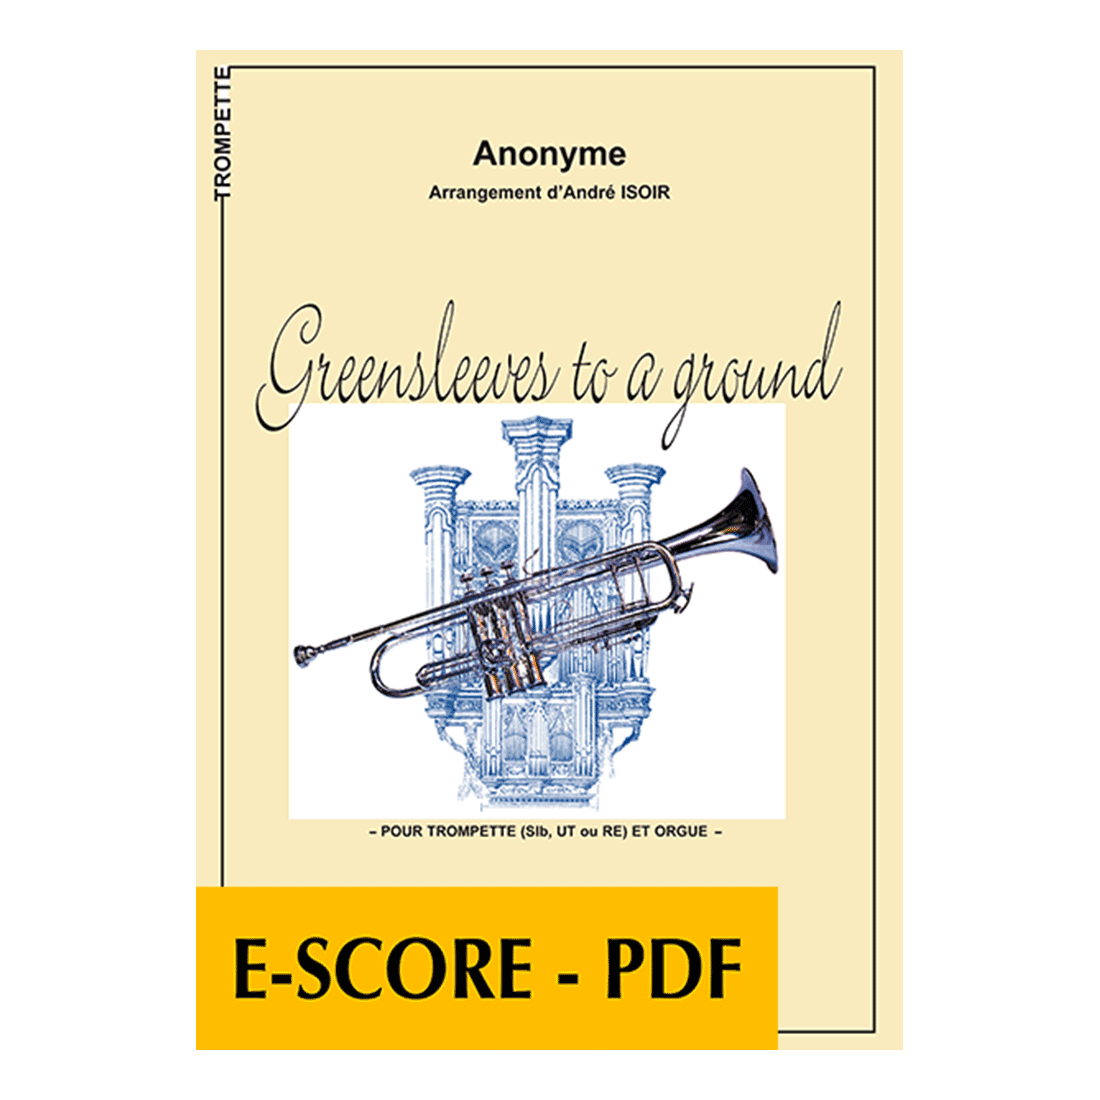 Greensleeves to a ground for trumpet and organ - E-score PDF